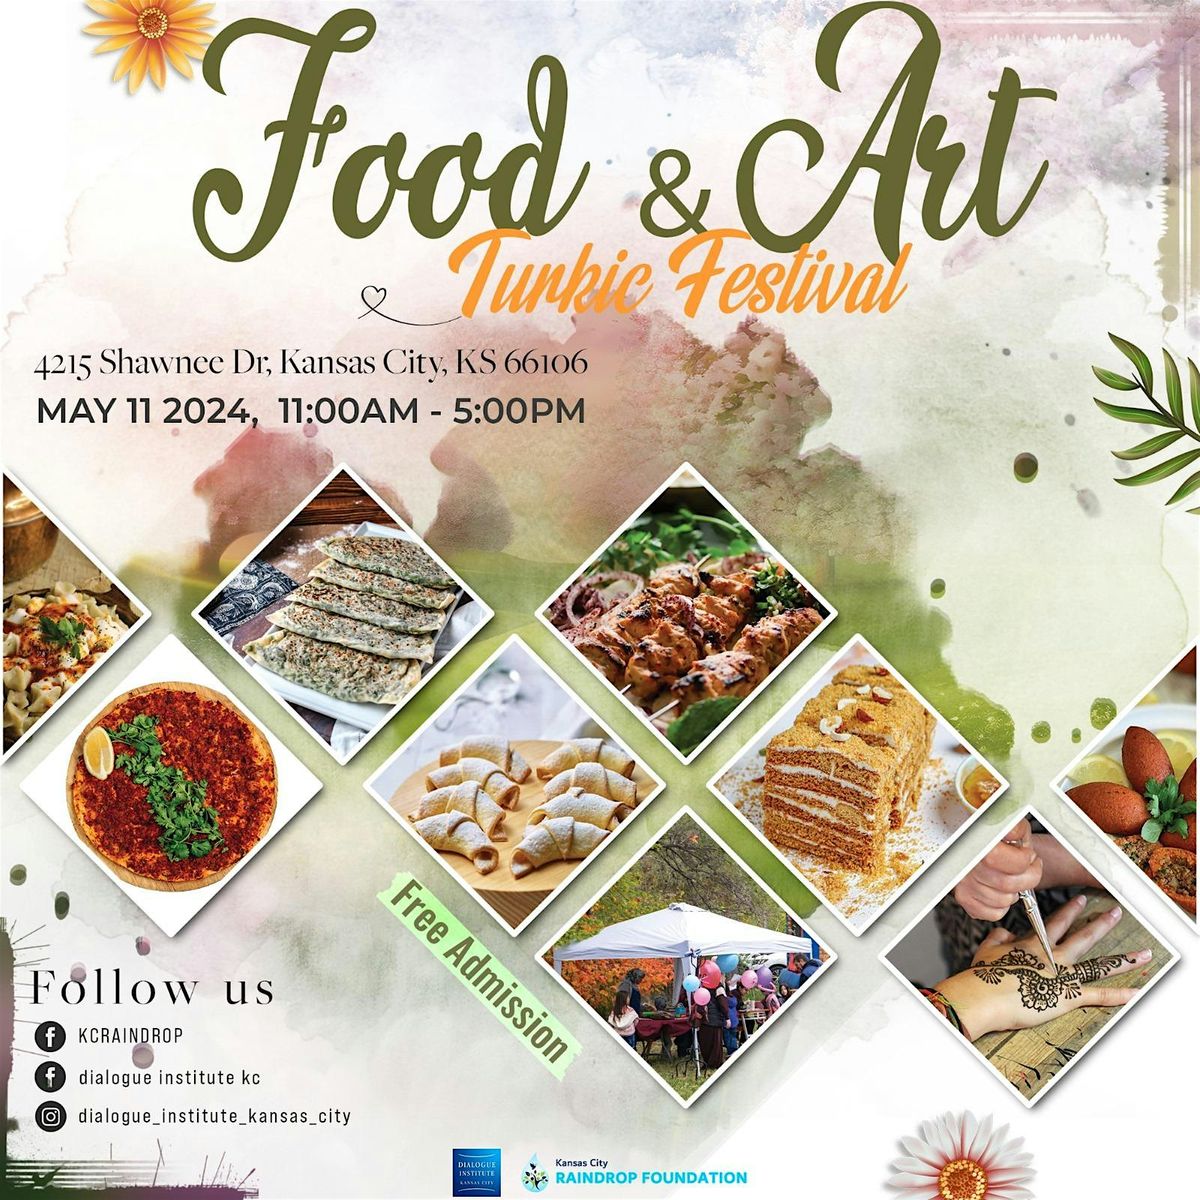 Turkic Food and Art Festival